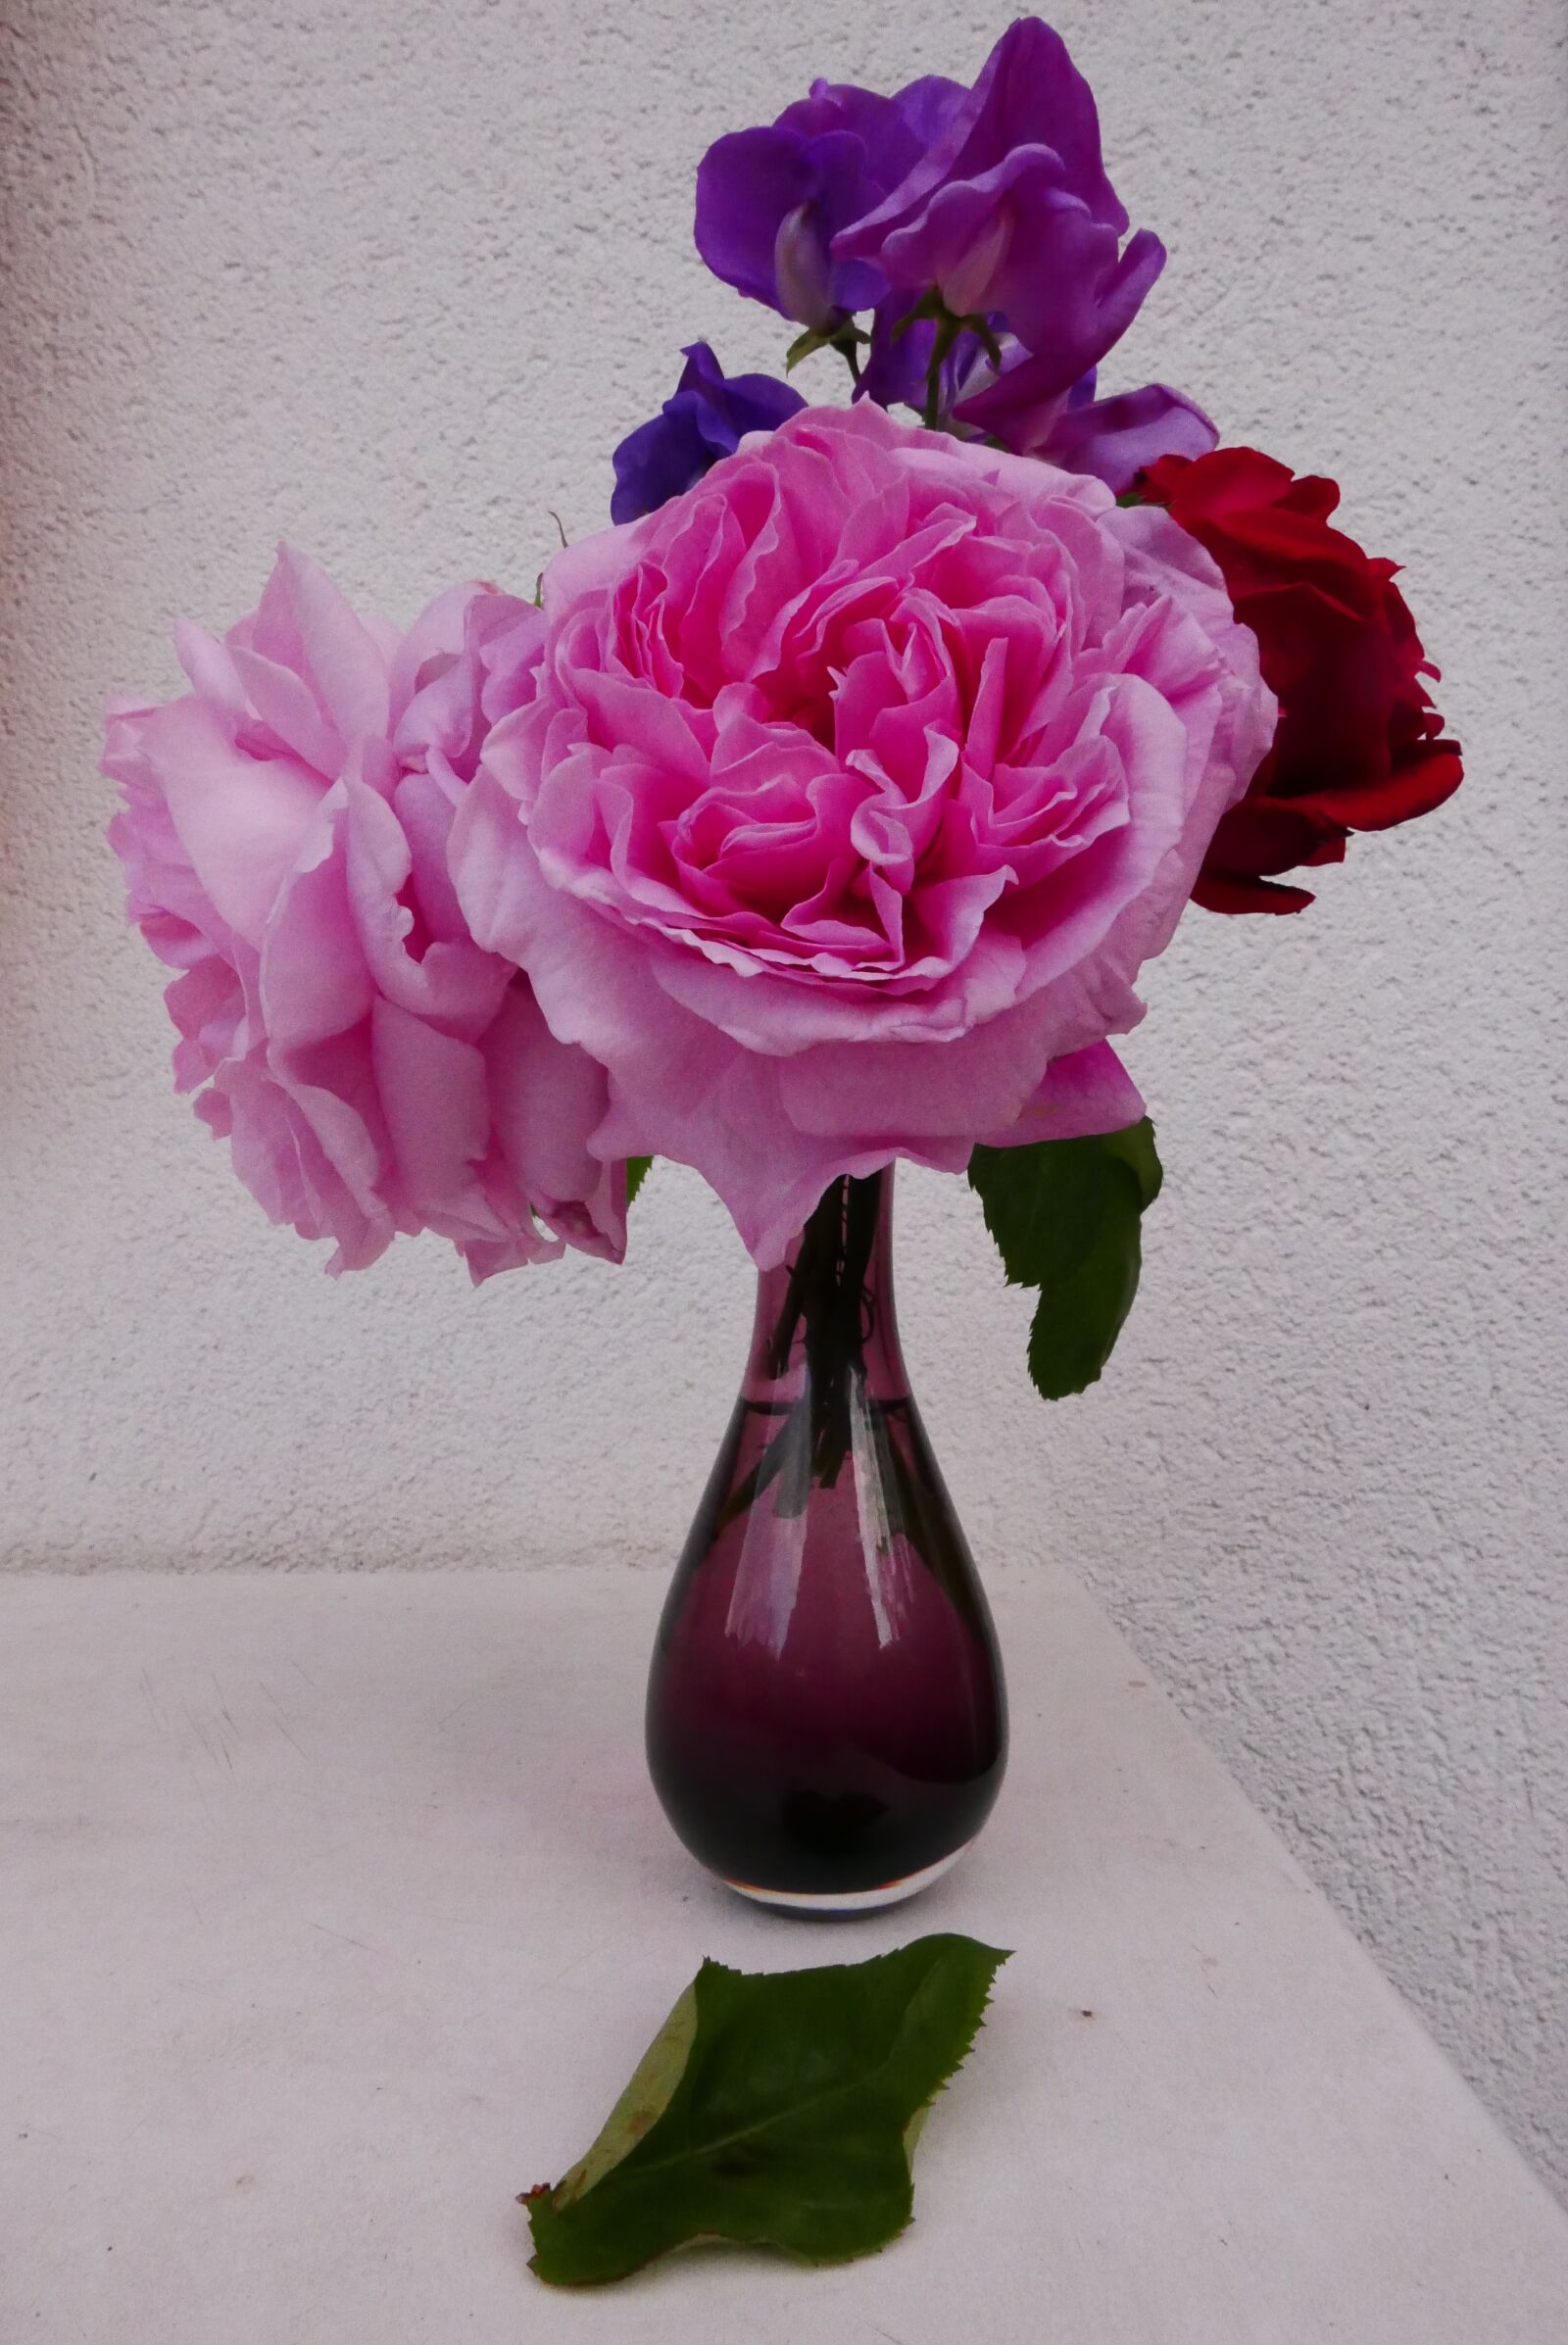 Leica D-Lux (Typ 109) sample photo. Flowers, bouquet, roses photography